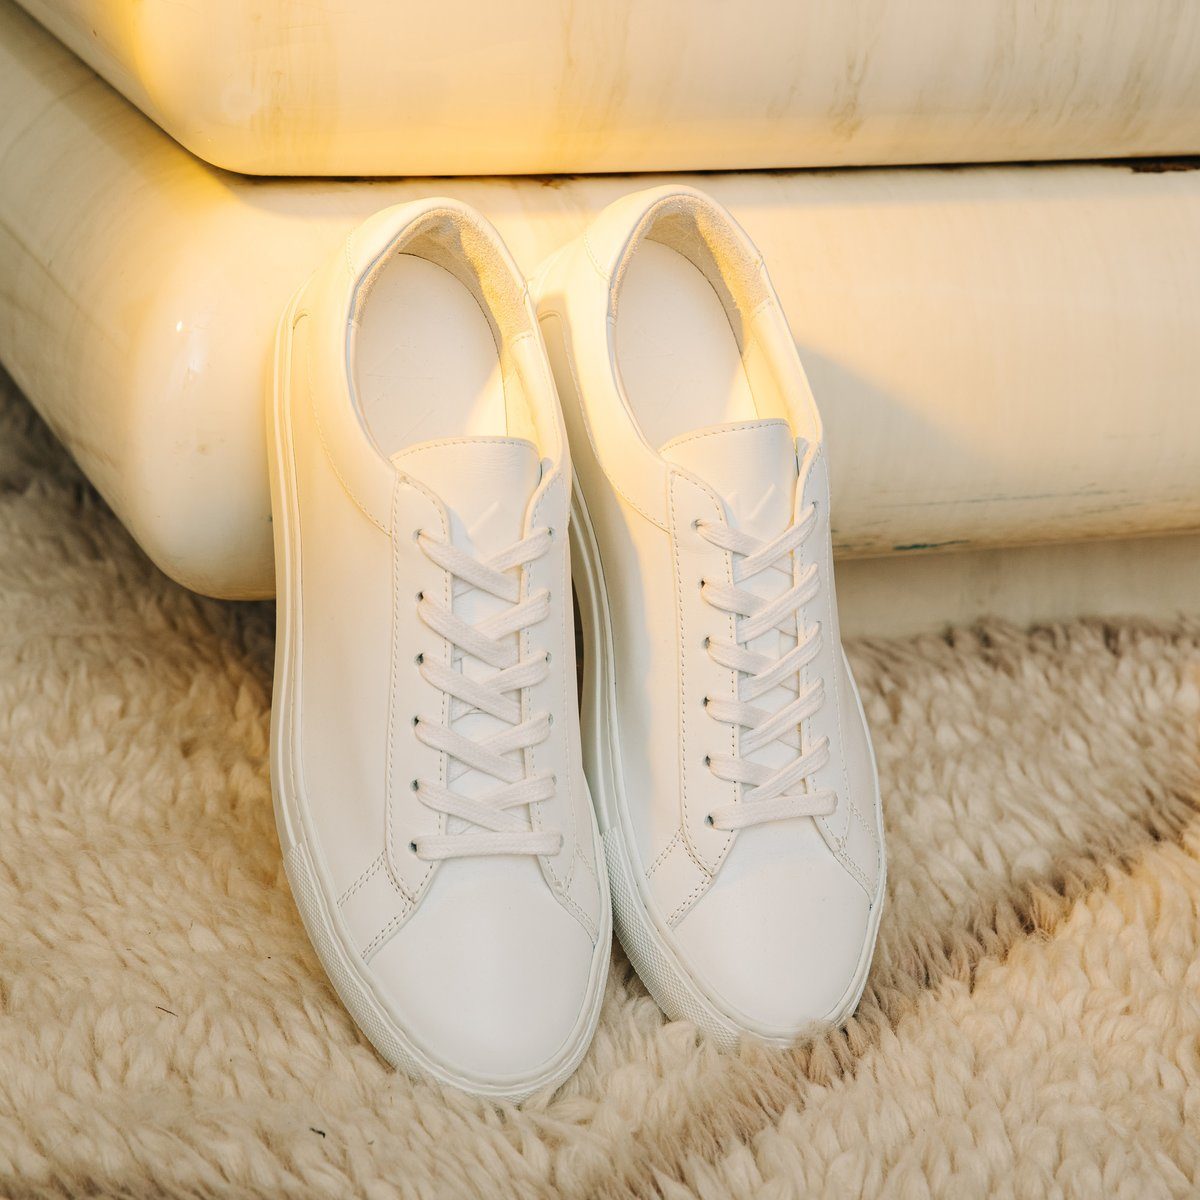 Look to KOIO if you want to find some of the best white sneakers available.